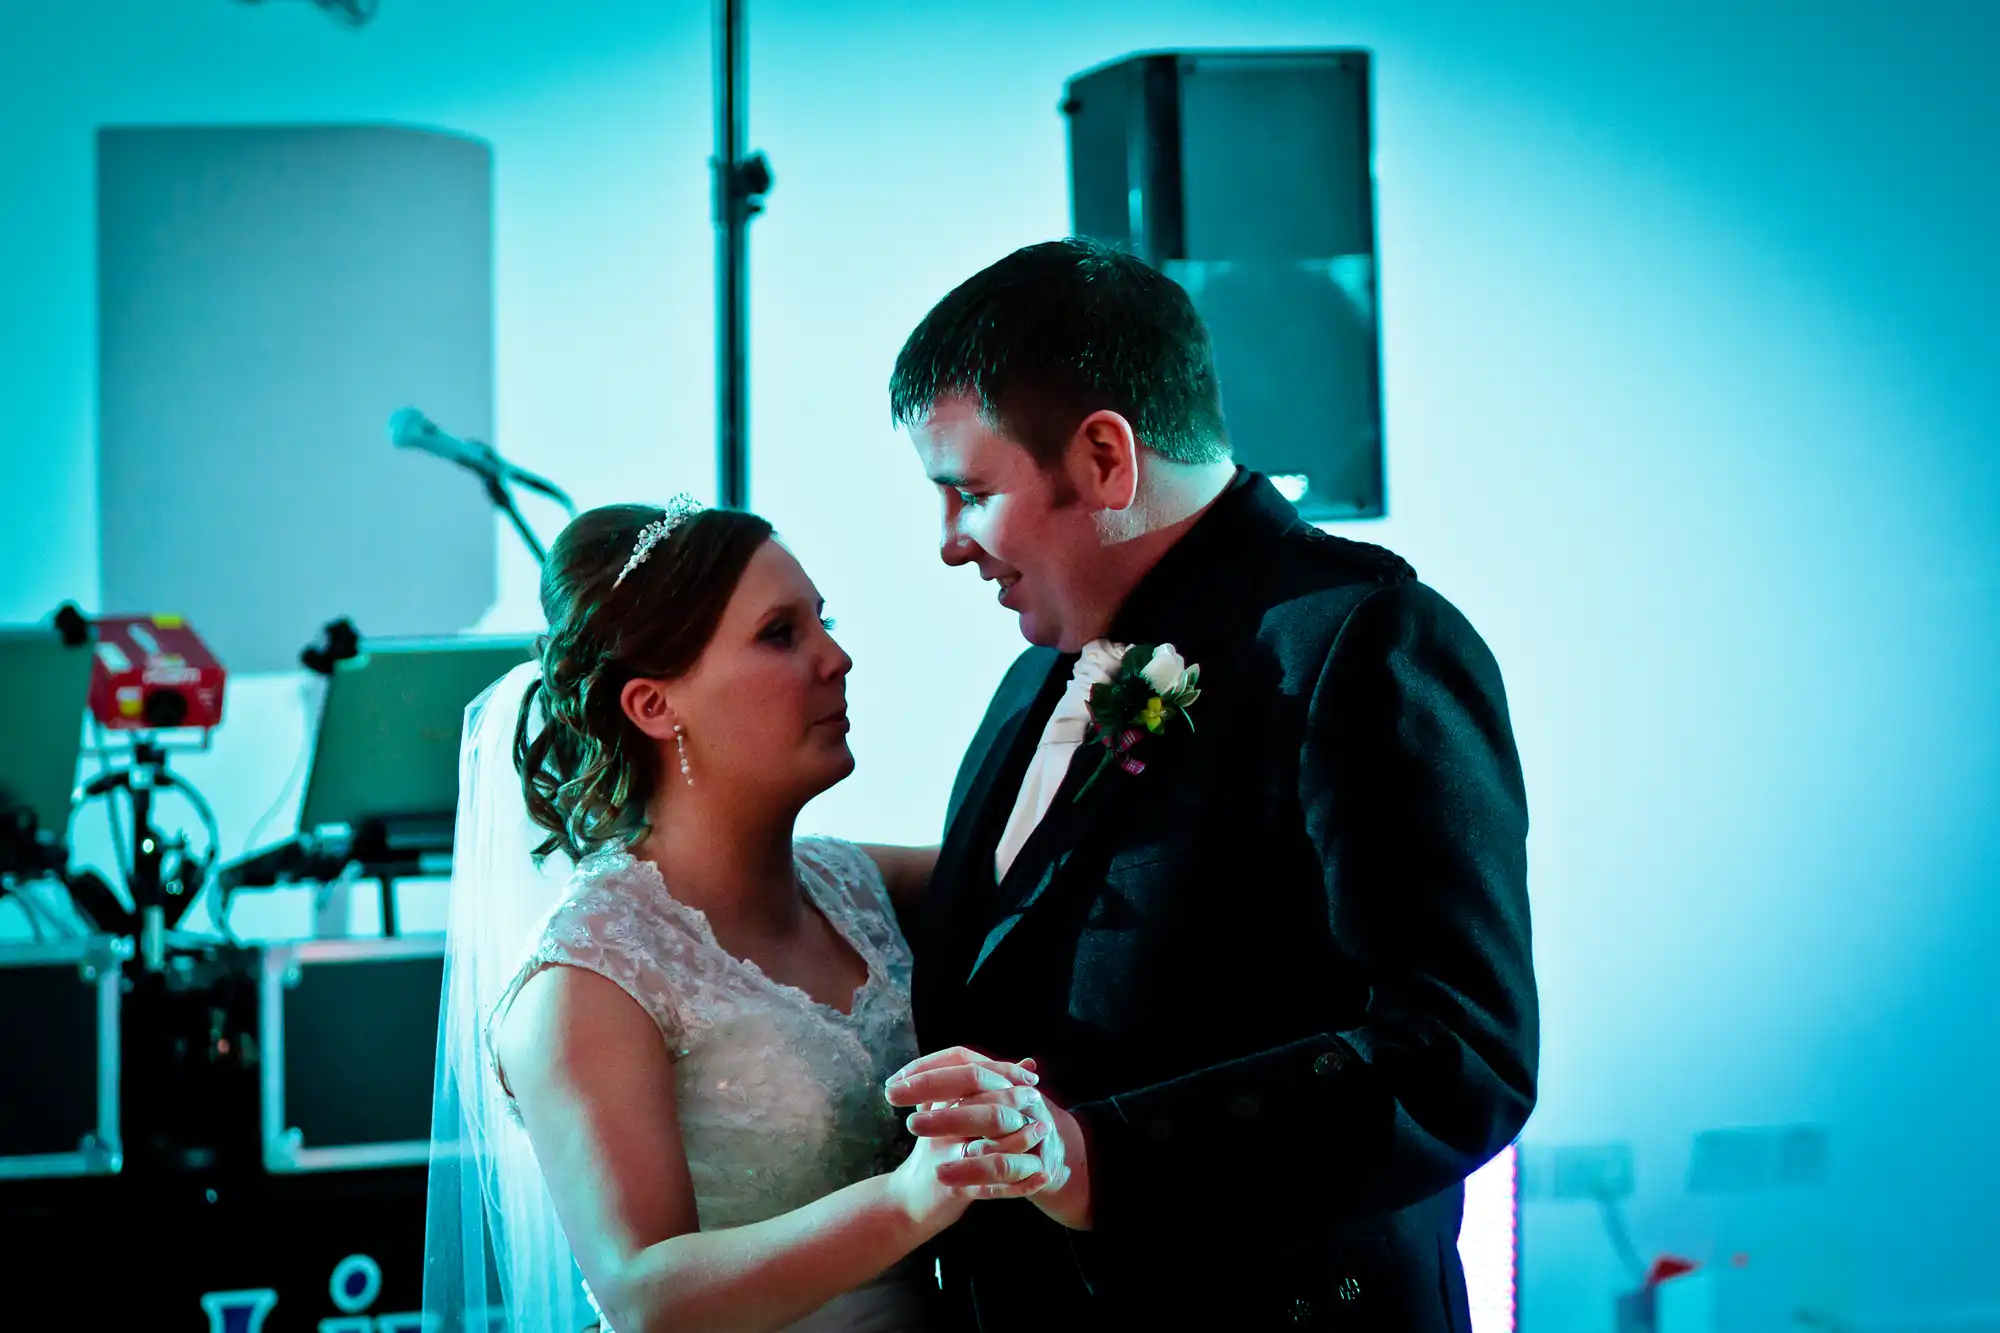 A bride and groom share an intimate dance under blue lighting at their wedding reception, with speakers and dj equipment in the background.